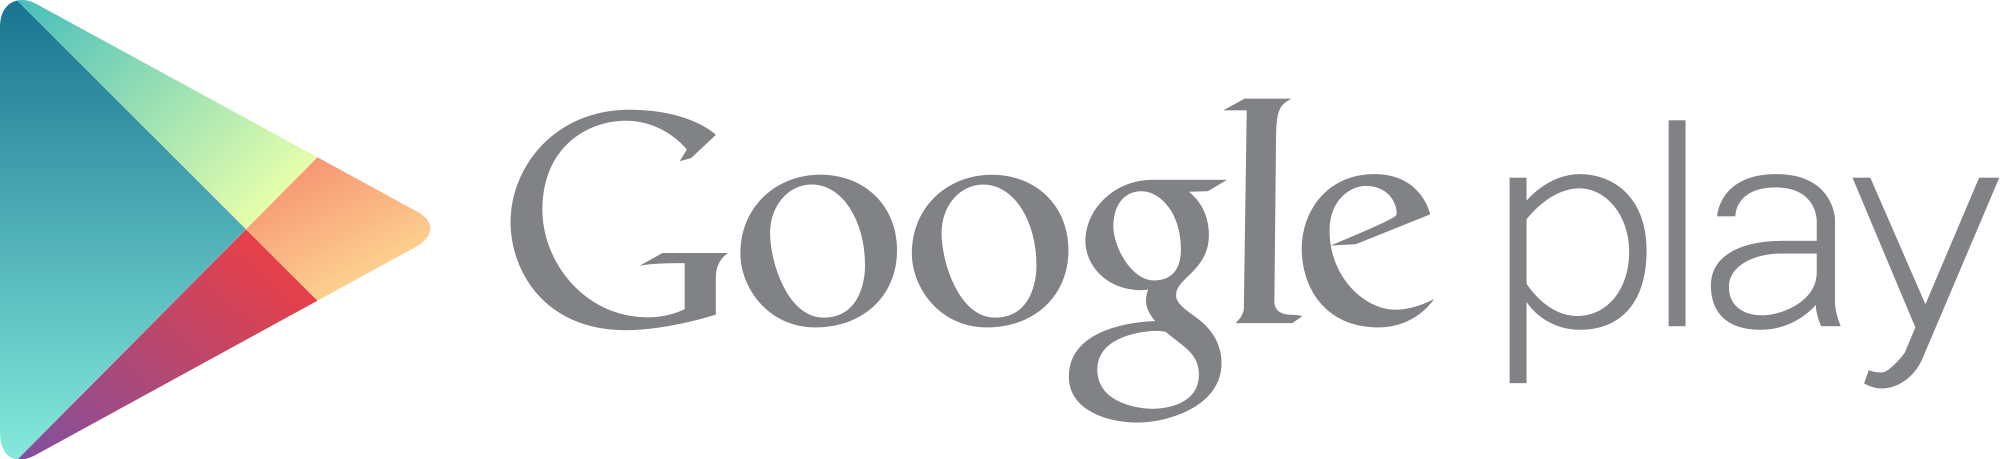 File svg wikimedia commons. Google play logo png